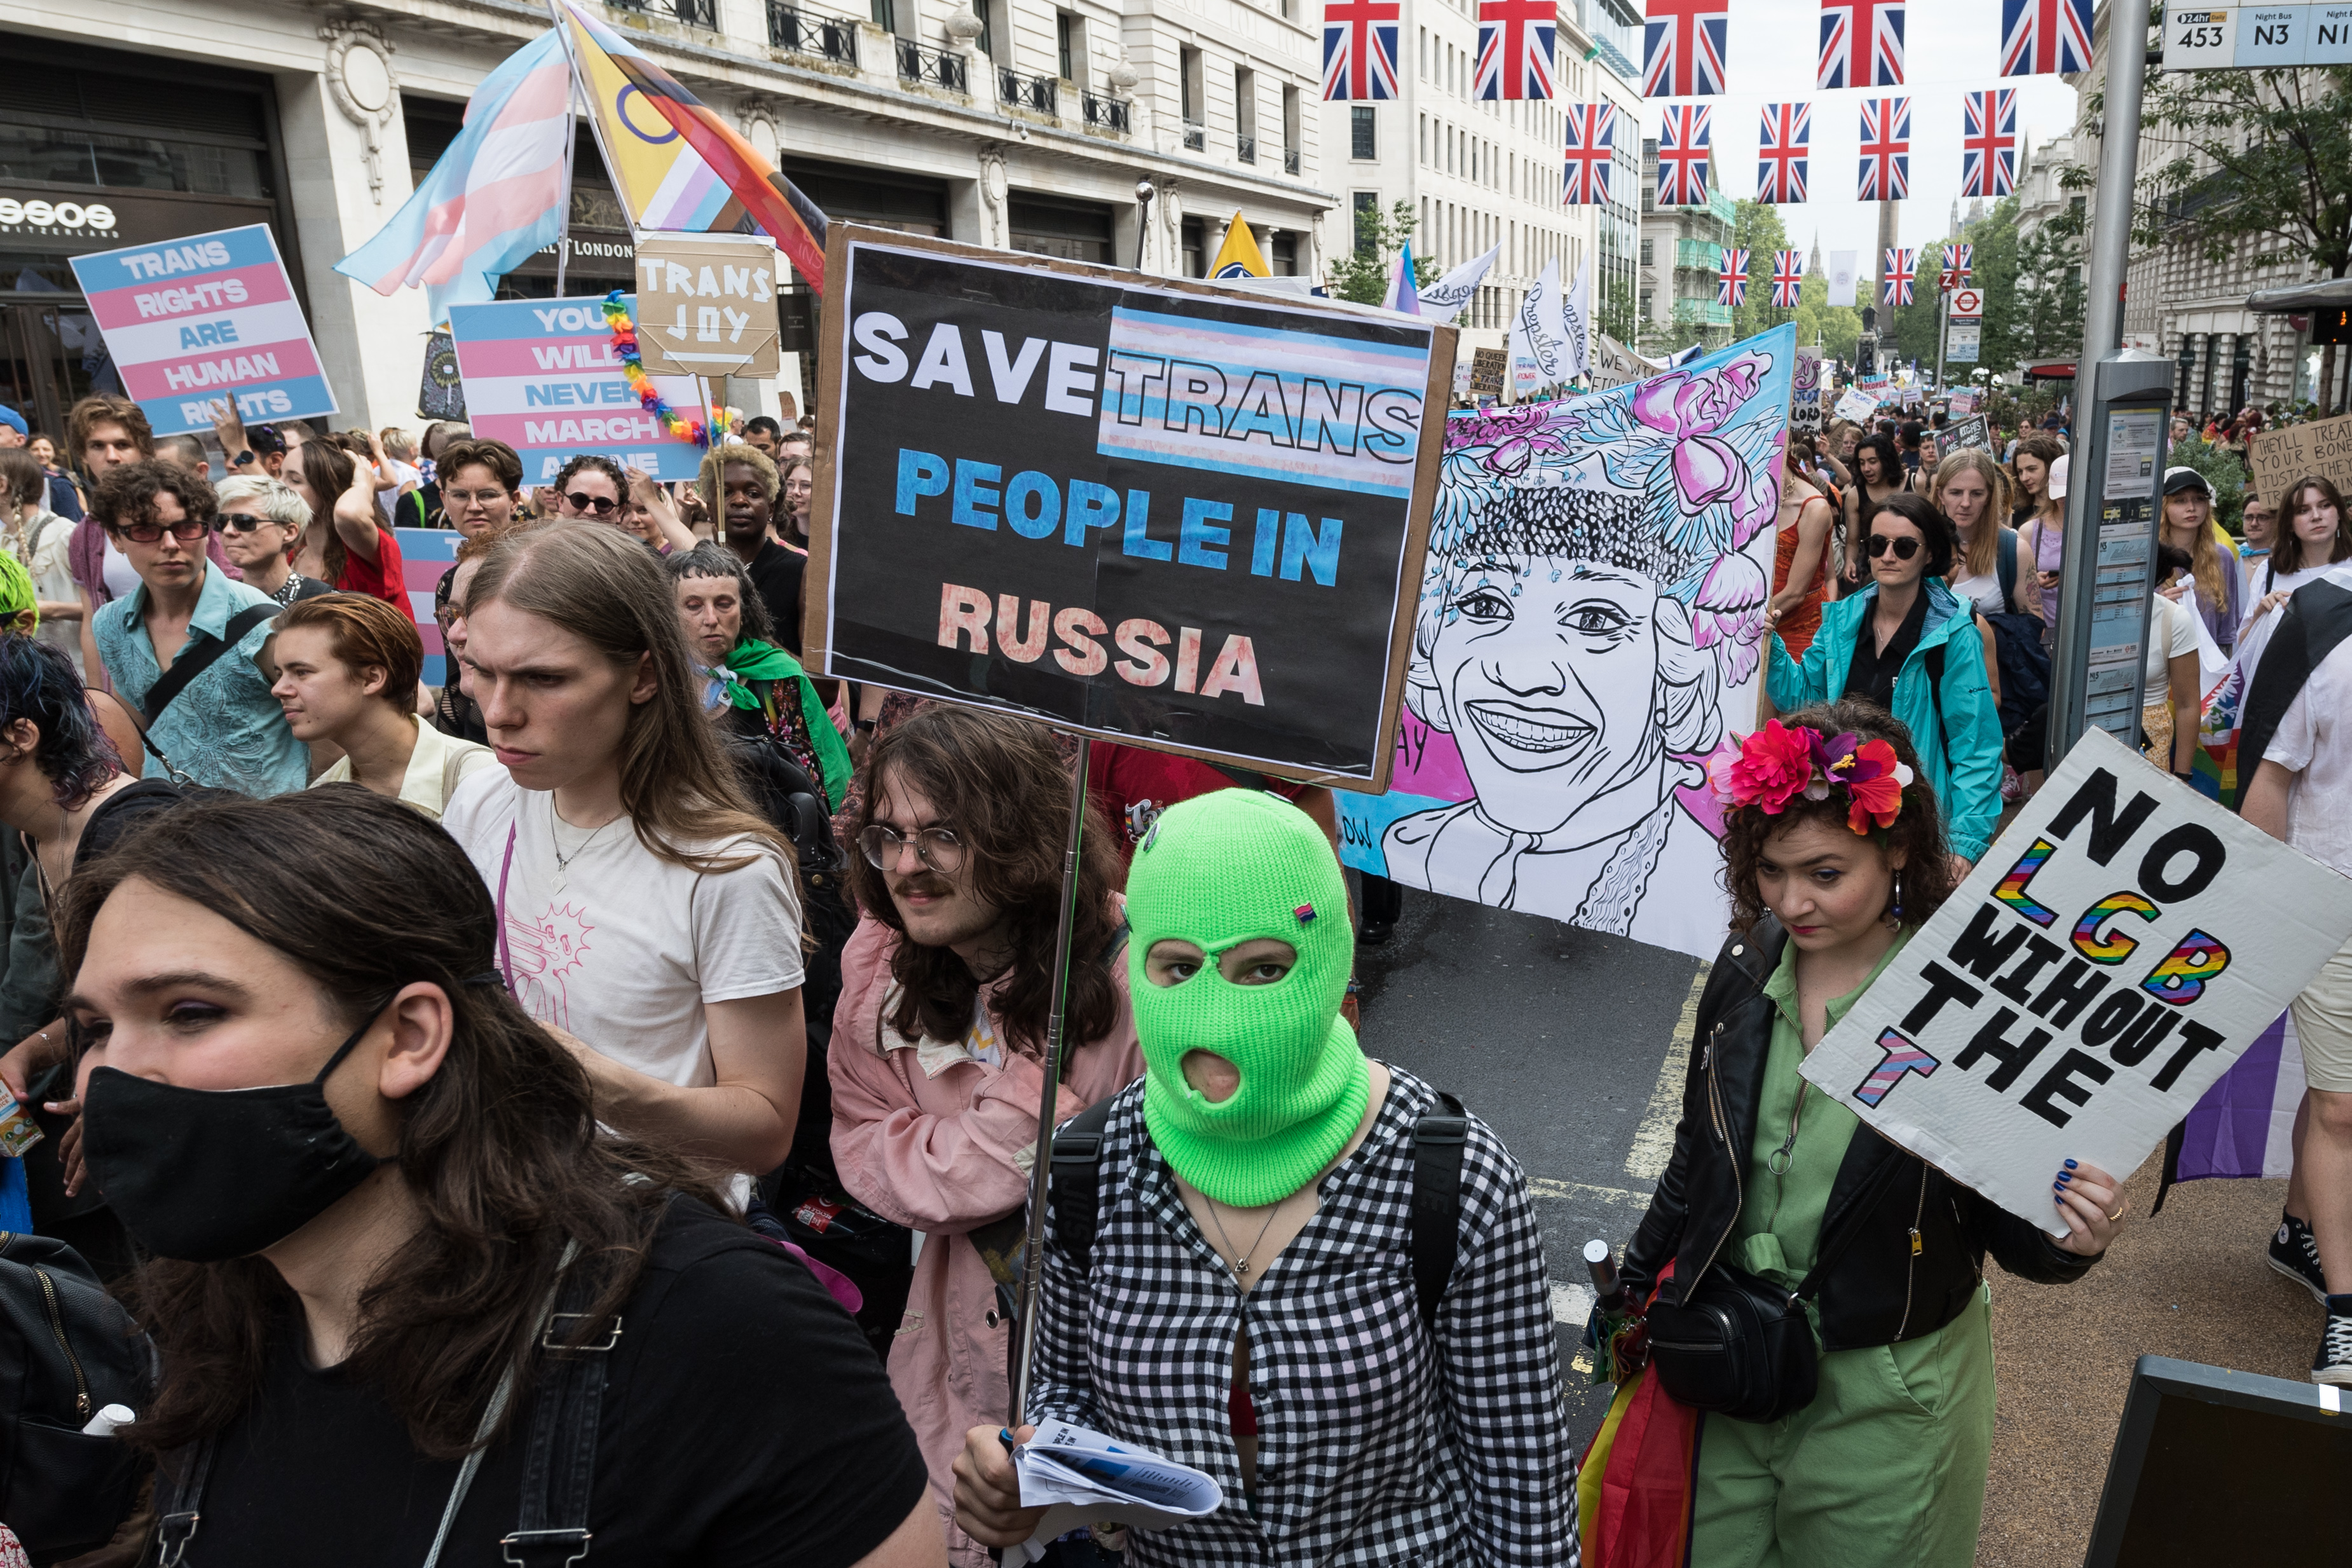 Russia anti-trans law People prepare to flee amid ban on trans healthcare openDemocracy